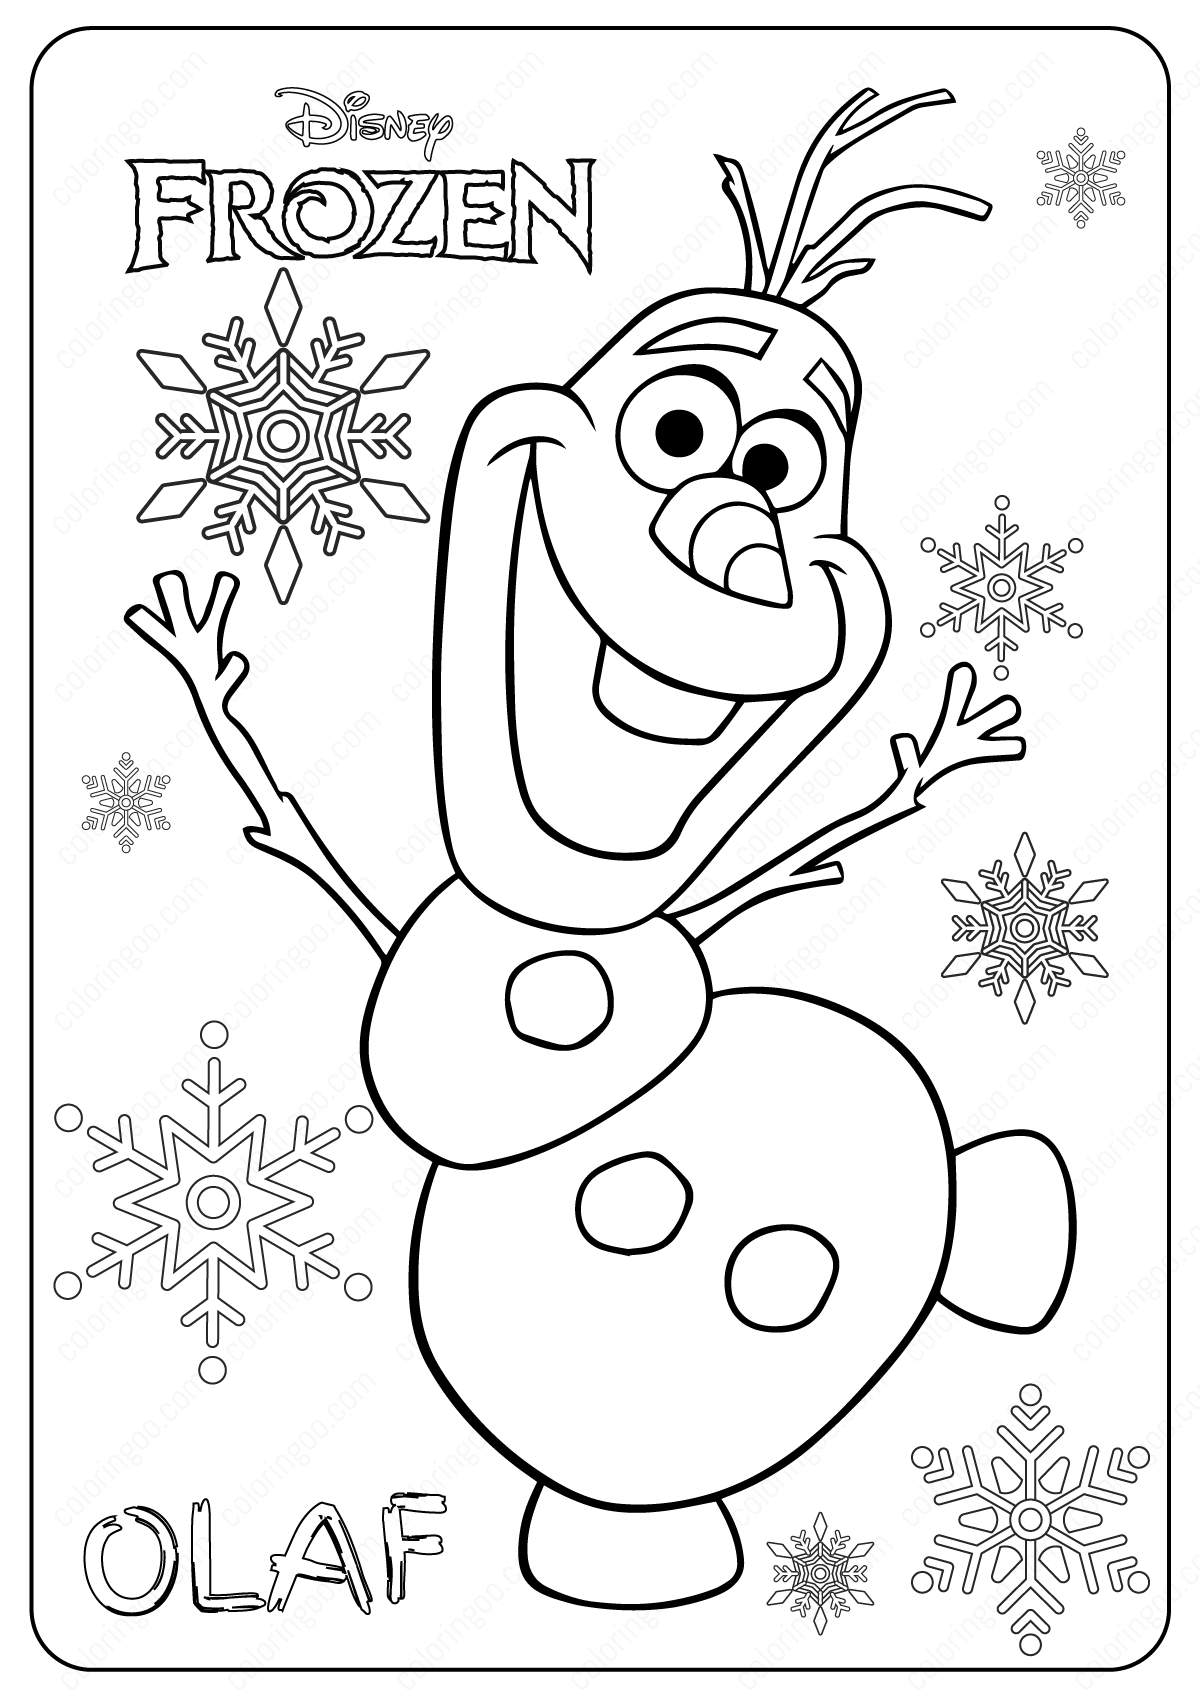 frozen olaf coloring pages